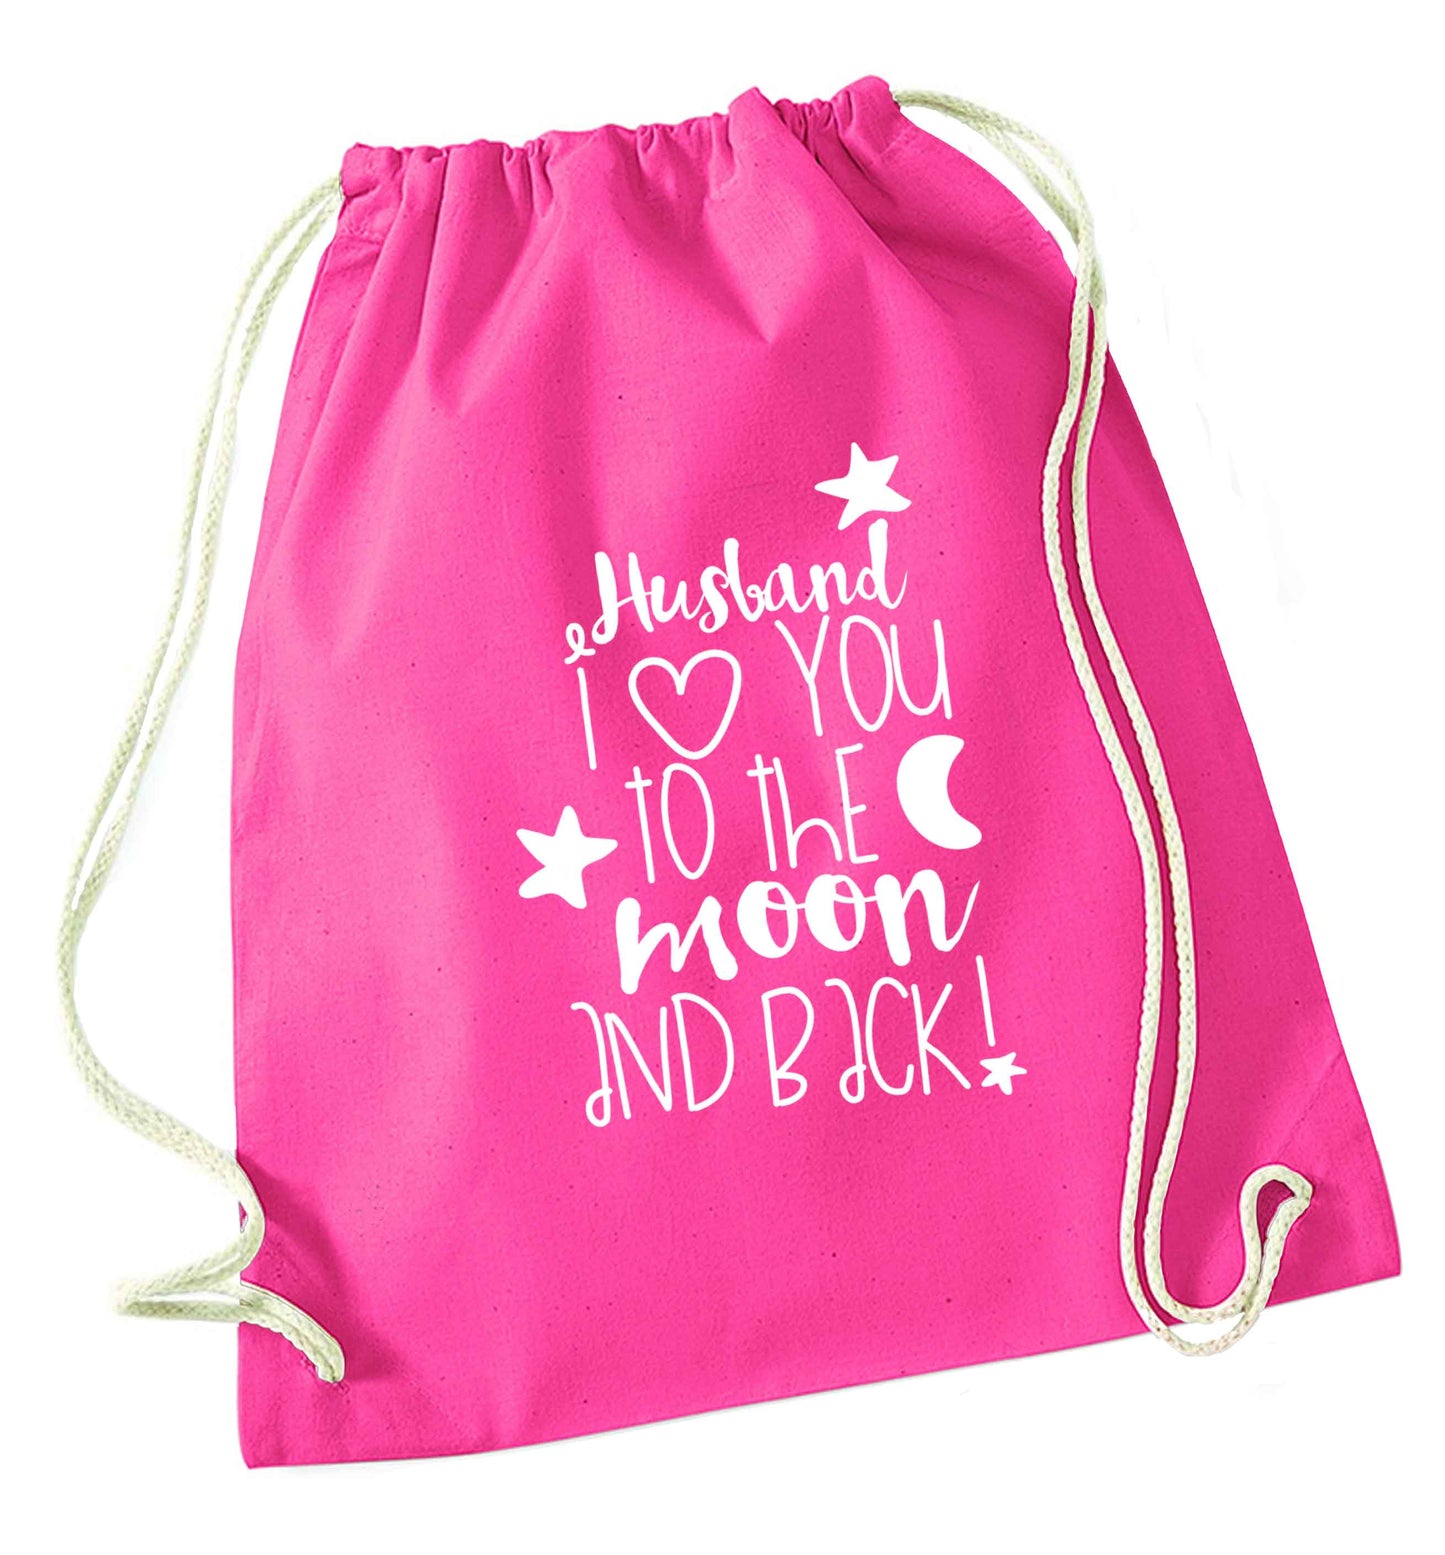 Husband I love you to the moon and back pink drawstring bag